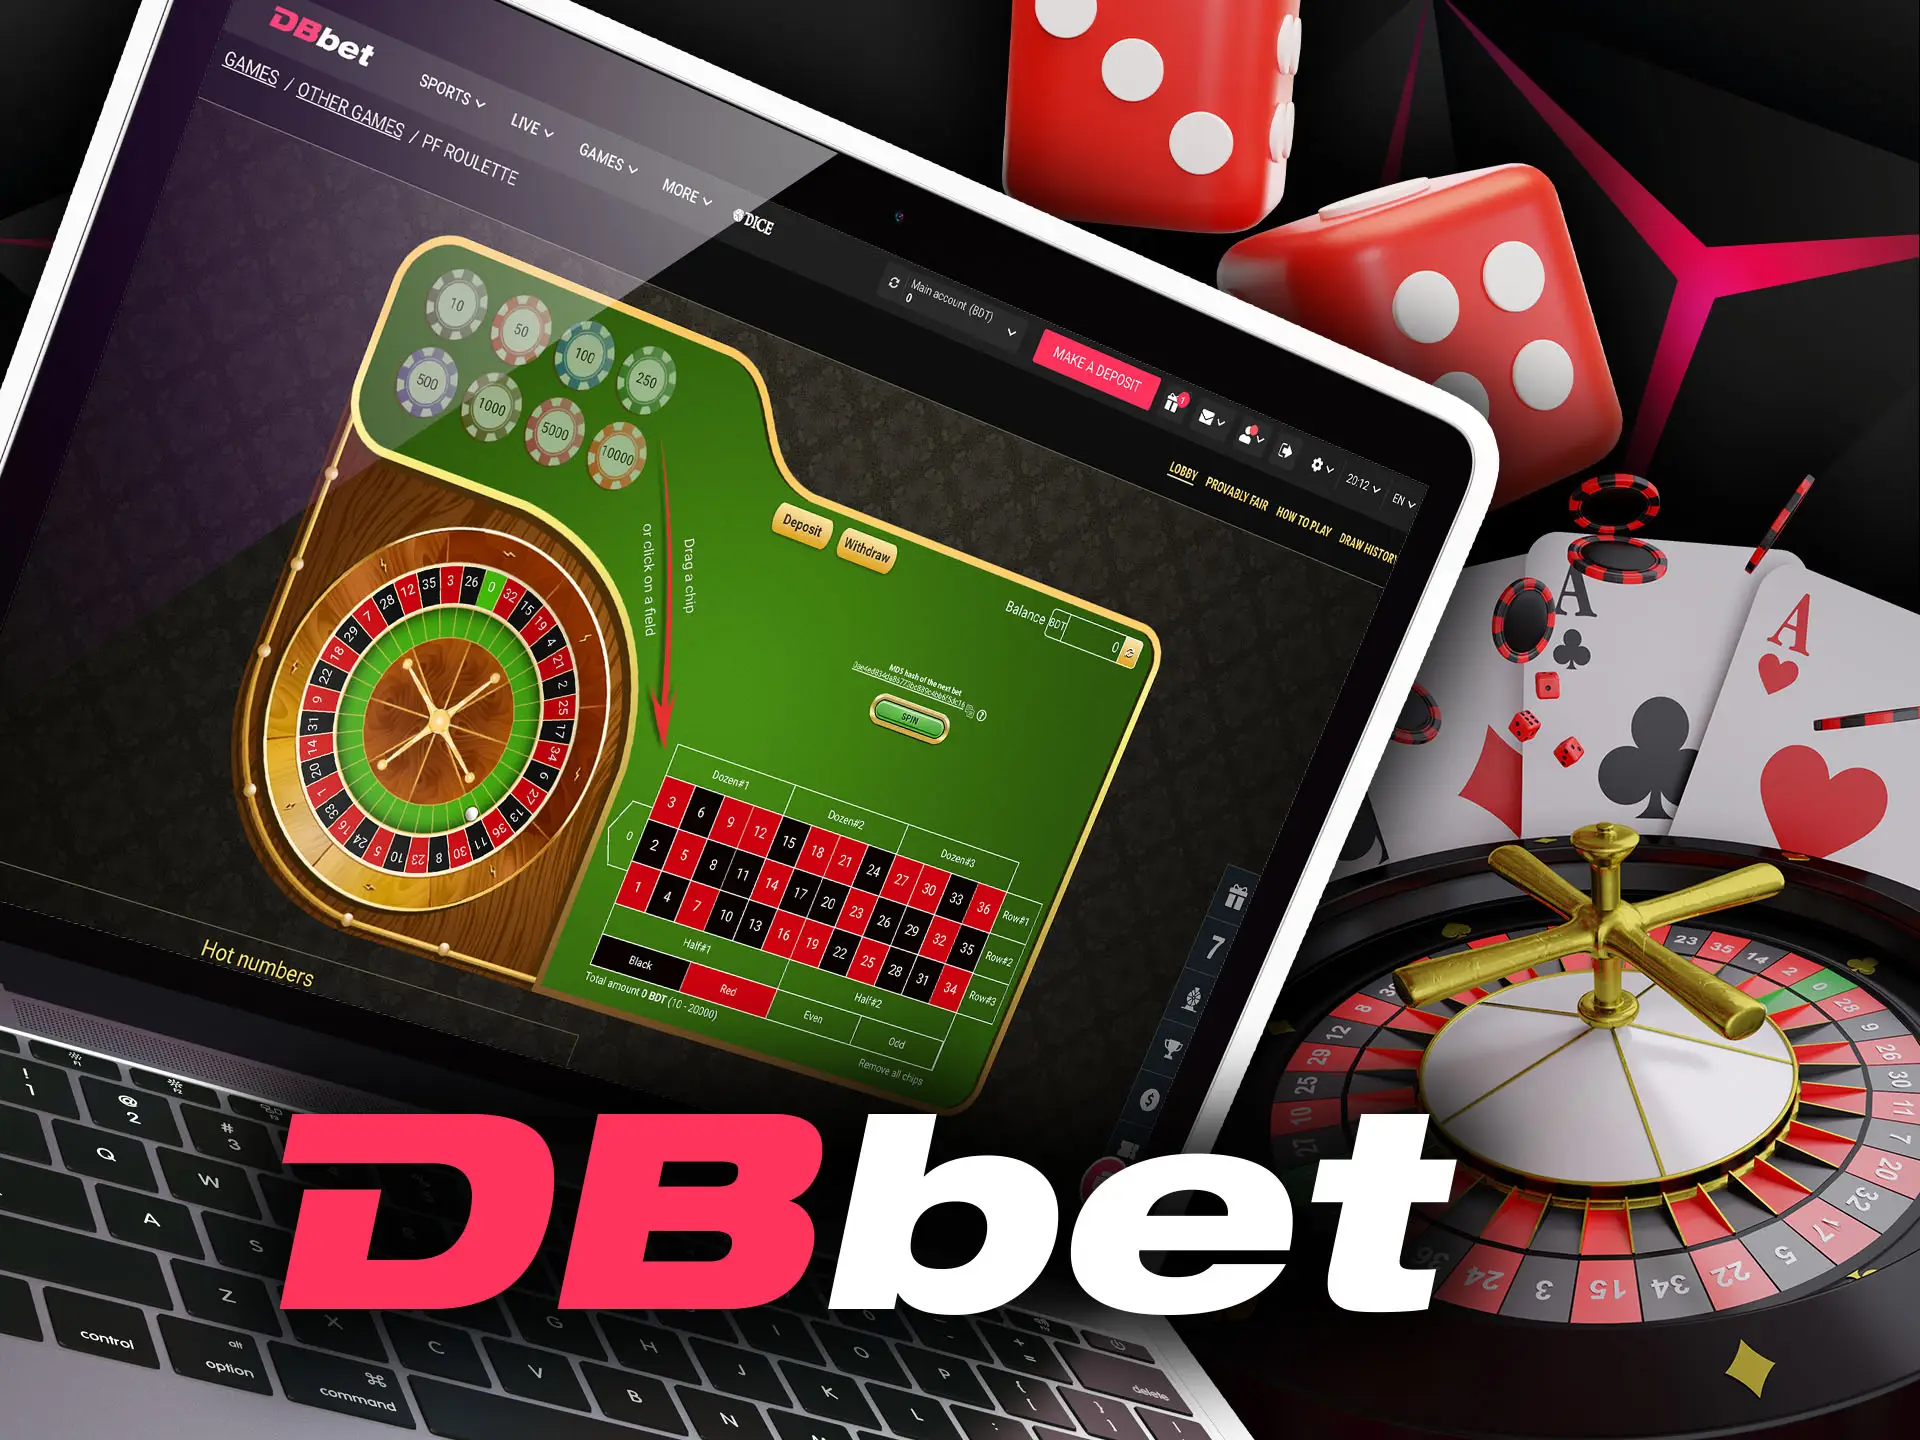 There are different types of roulette in the DBbet casino.